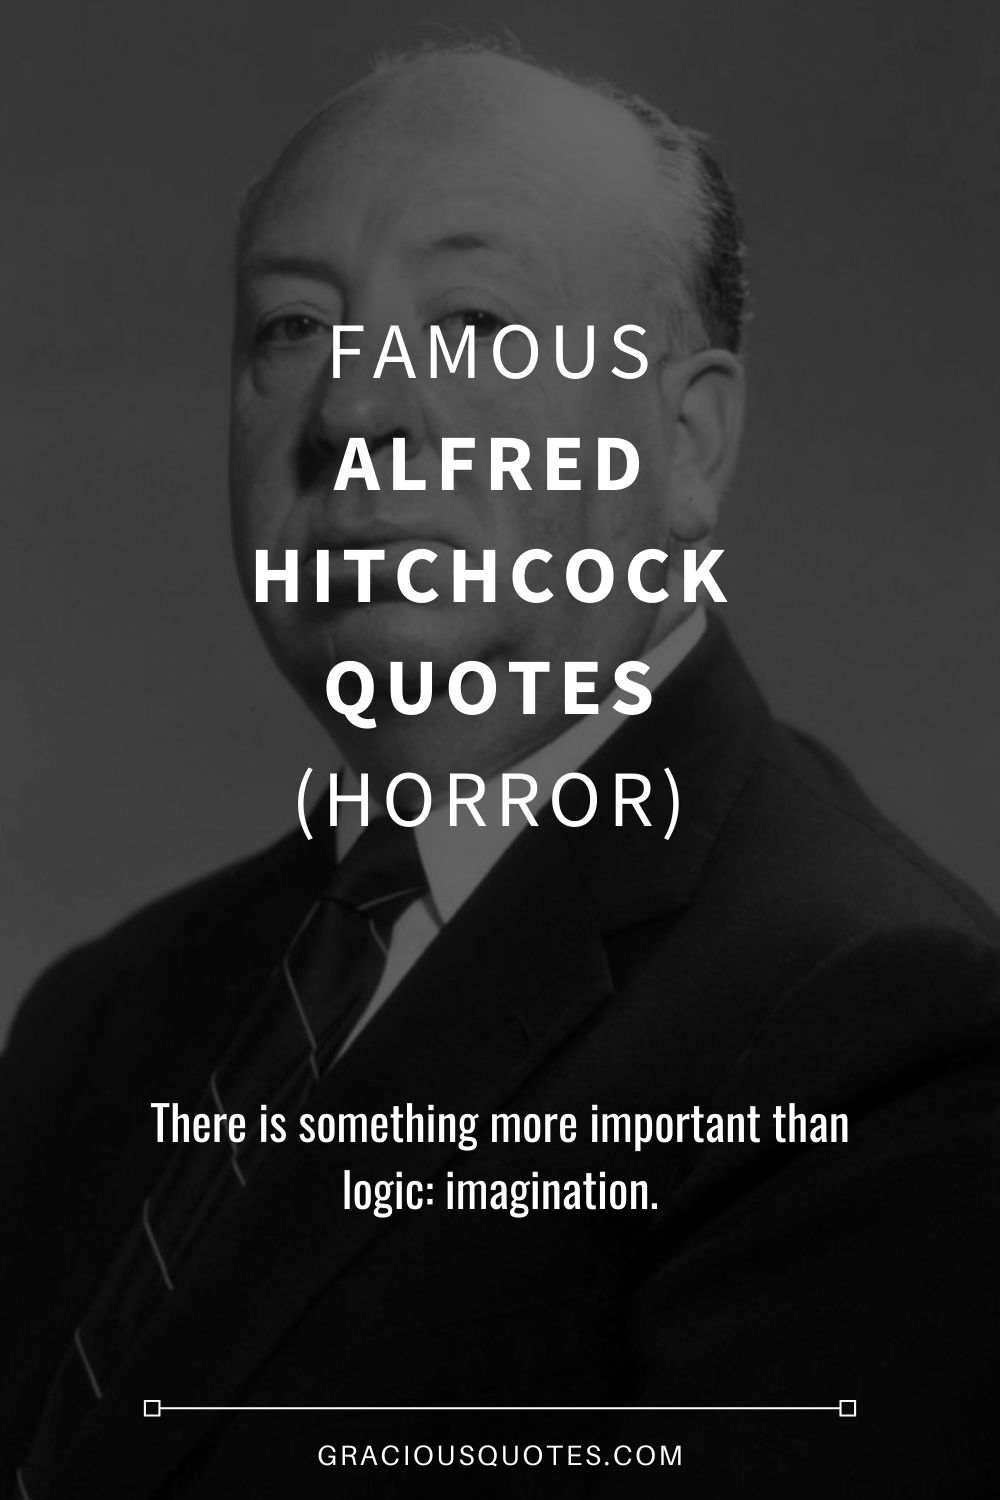 Famous Alfred Hitchcock Quotes (HORROR) - Gracious Quotes